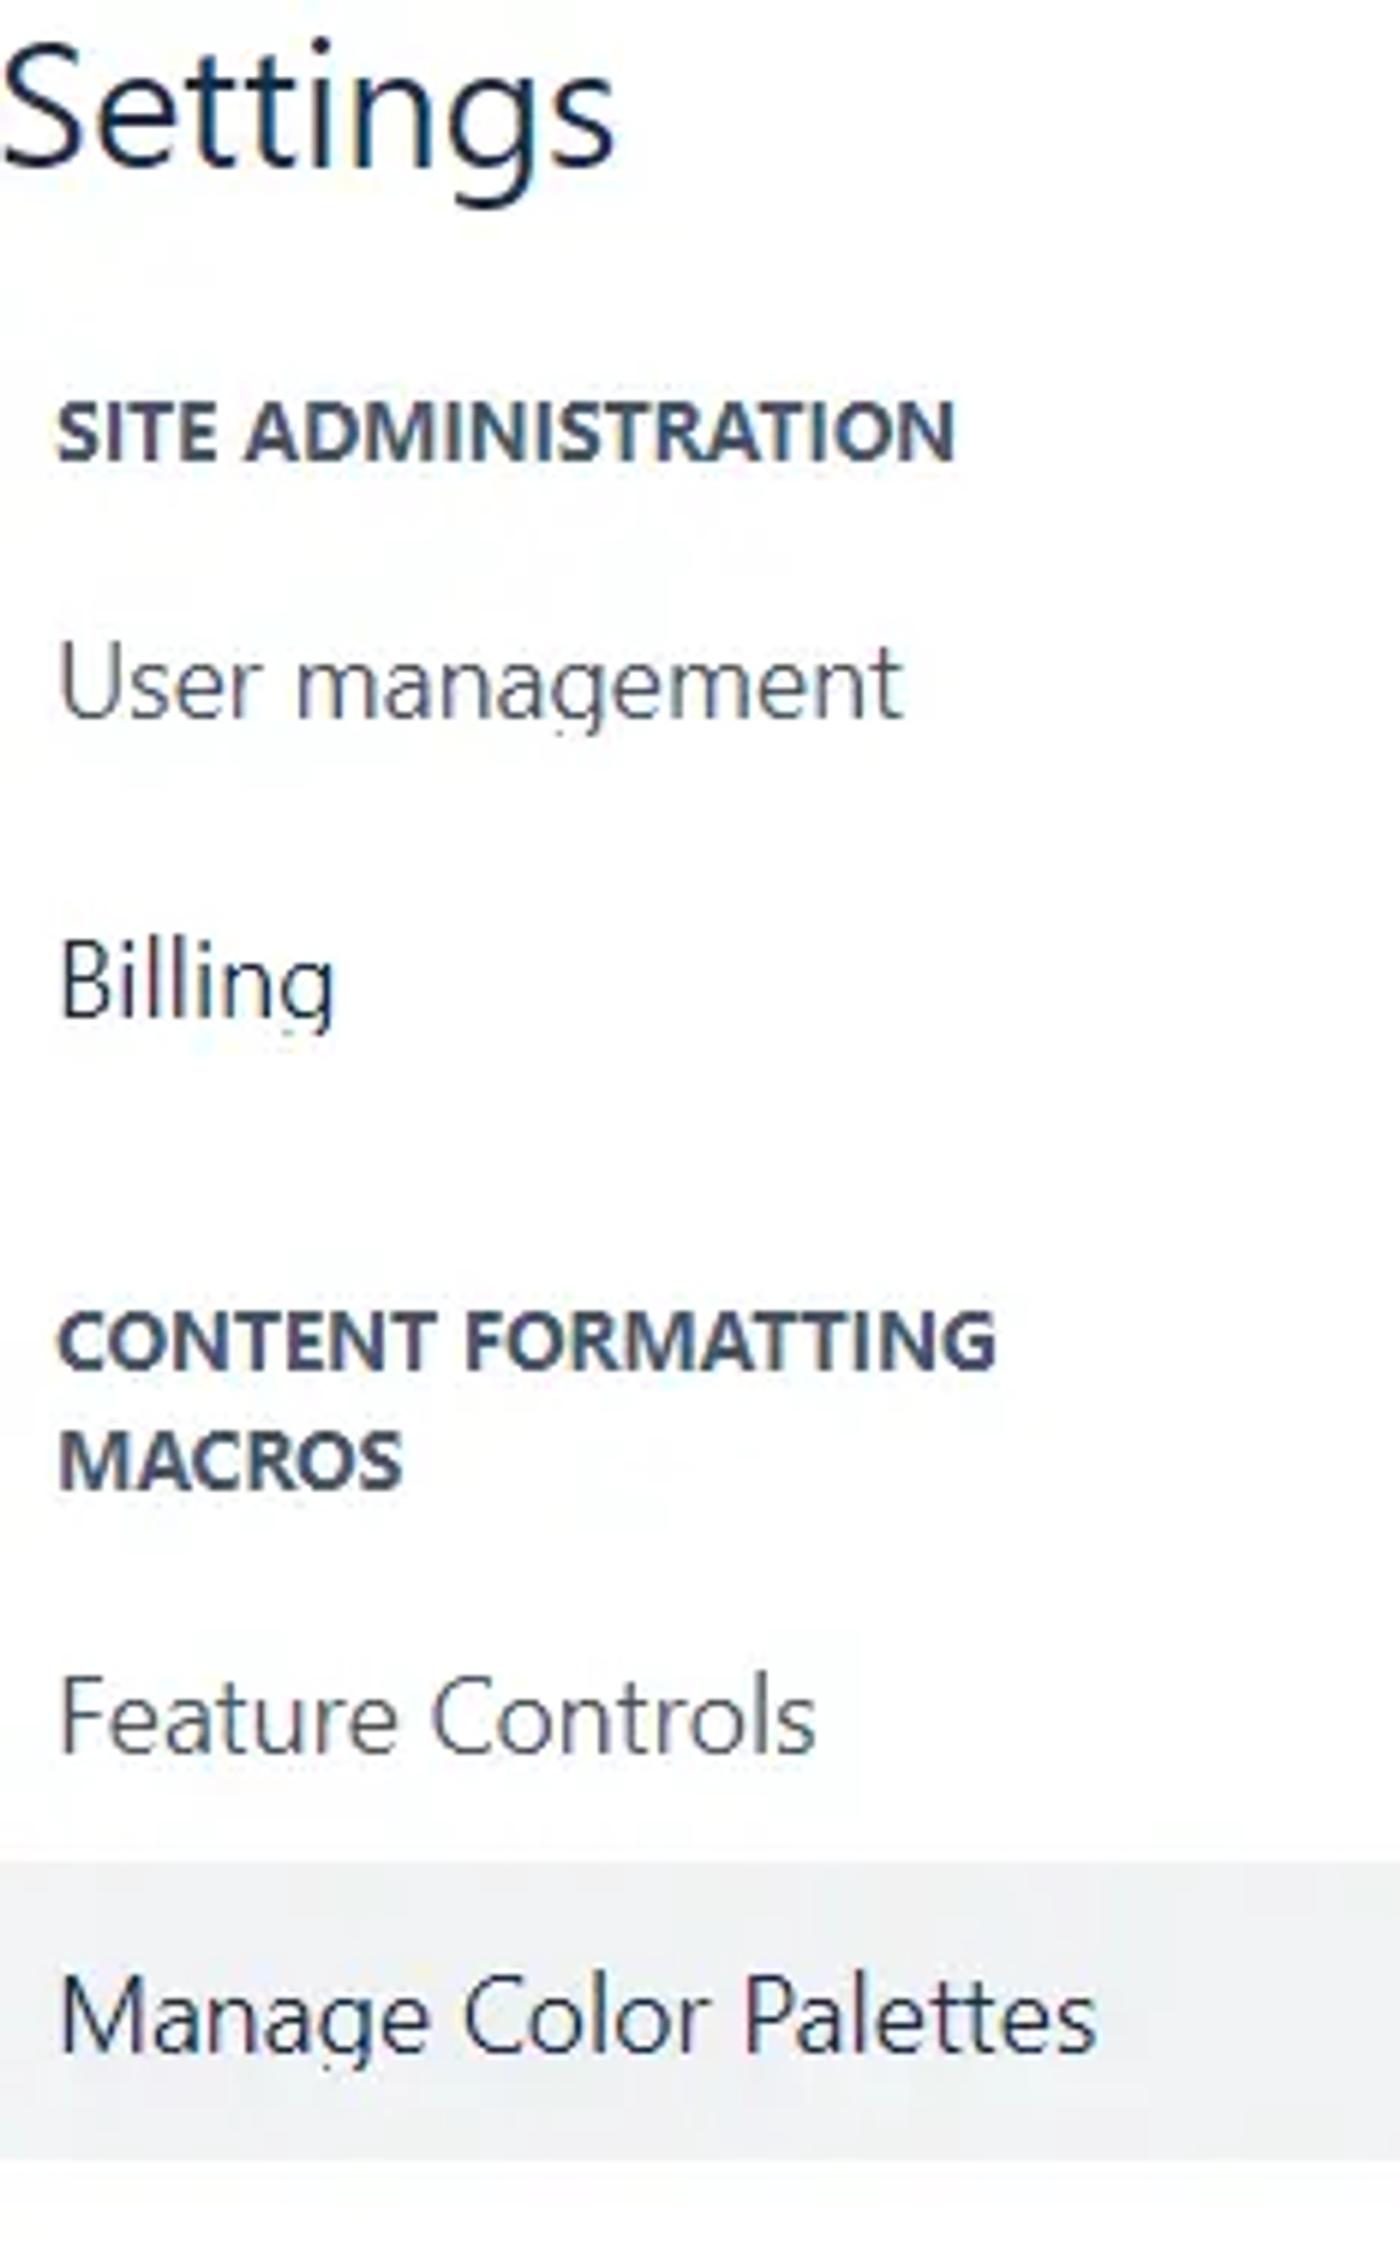 A user highlighting “Manage Color Palettes” in the Confluence admin settings